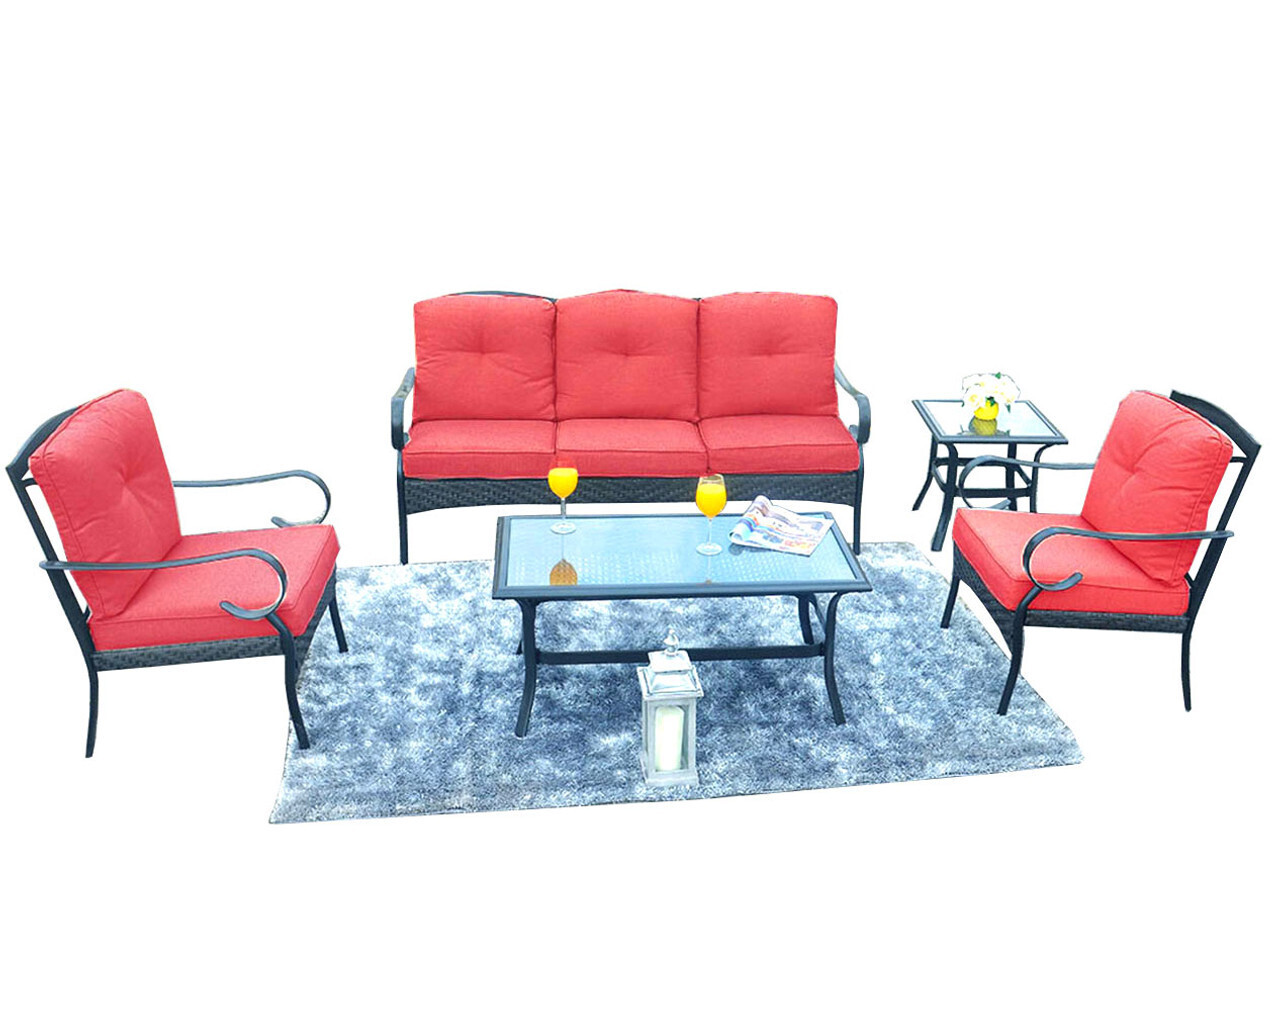 Patio Garden Iron Seating Set with Red Cushions